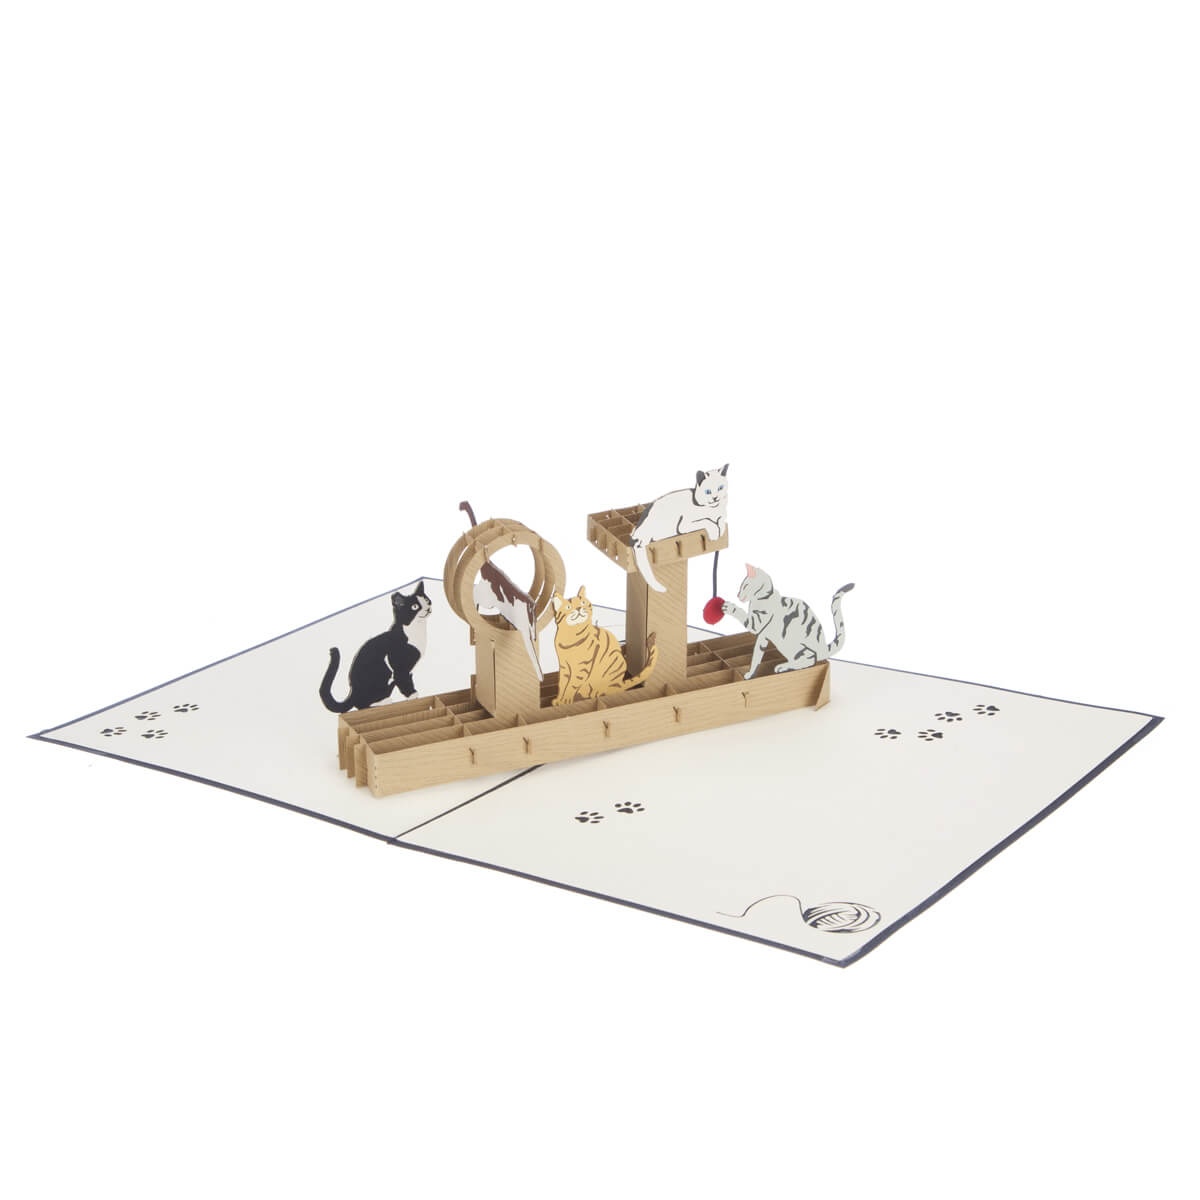 "Cat Tree" pop up card for cat lovers featuring a 3D wood effect paper cat tree with 5 cats playing on it, fully open at 180 degree angle